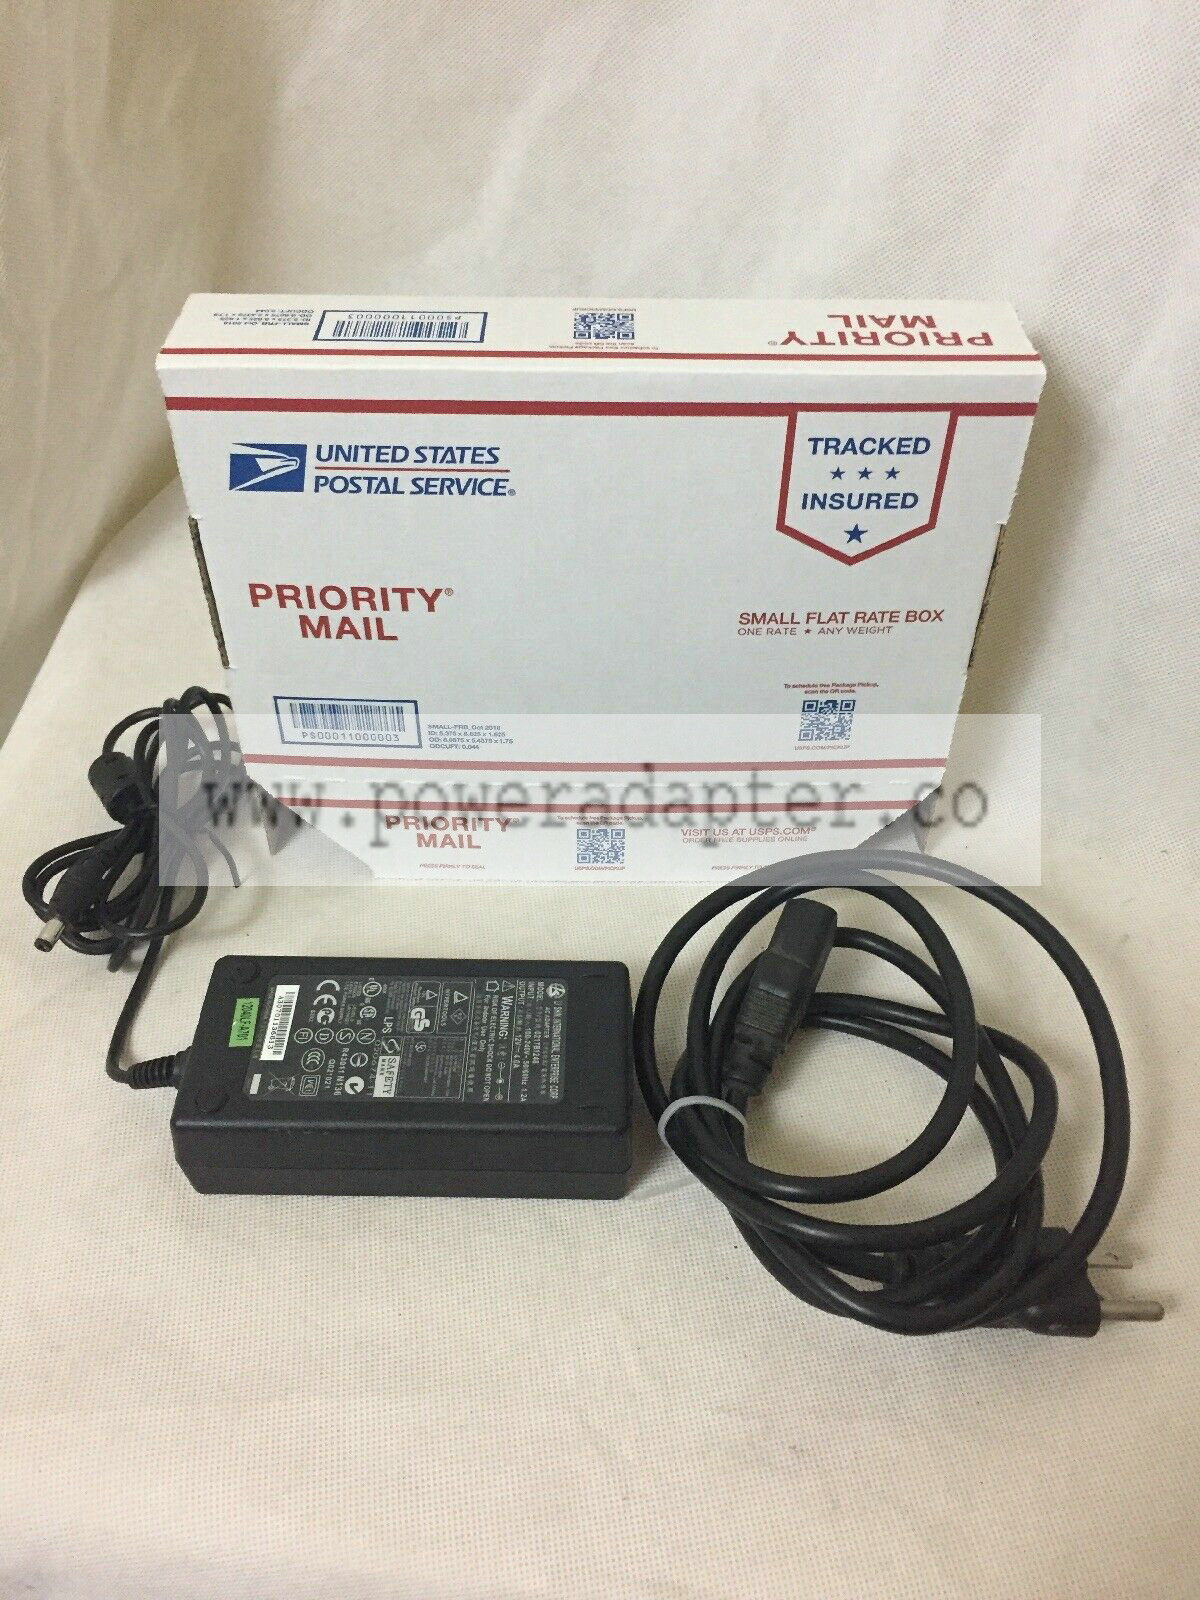 Li Shin AC Adapter Power Supply 12v 4a Model 0217B1248 020674-11 Tested Working Output Voltage(s): 12 V MPN: Does No - Click Image to Close